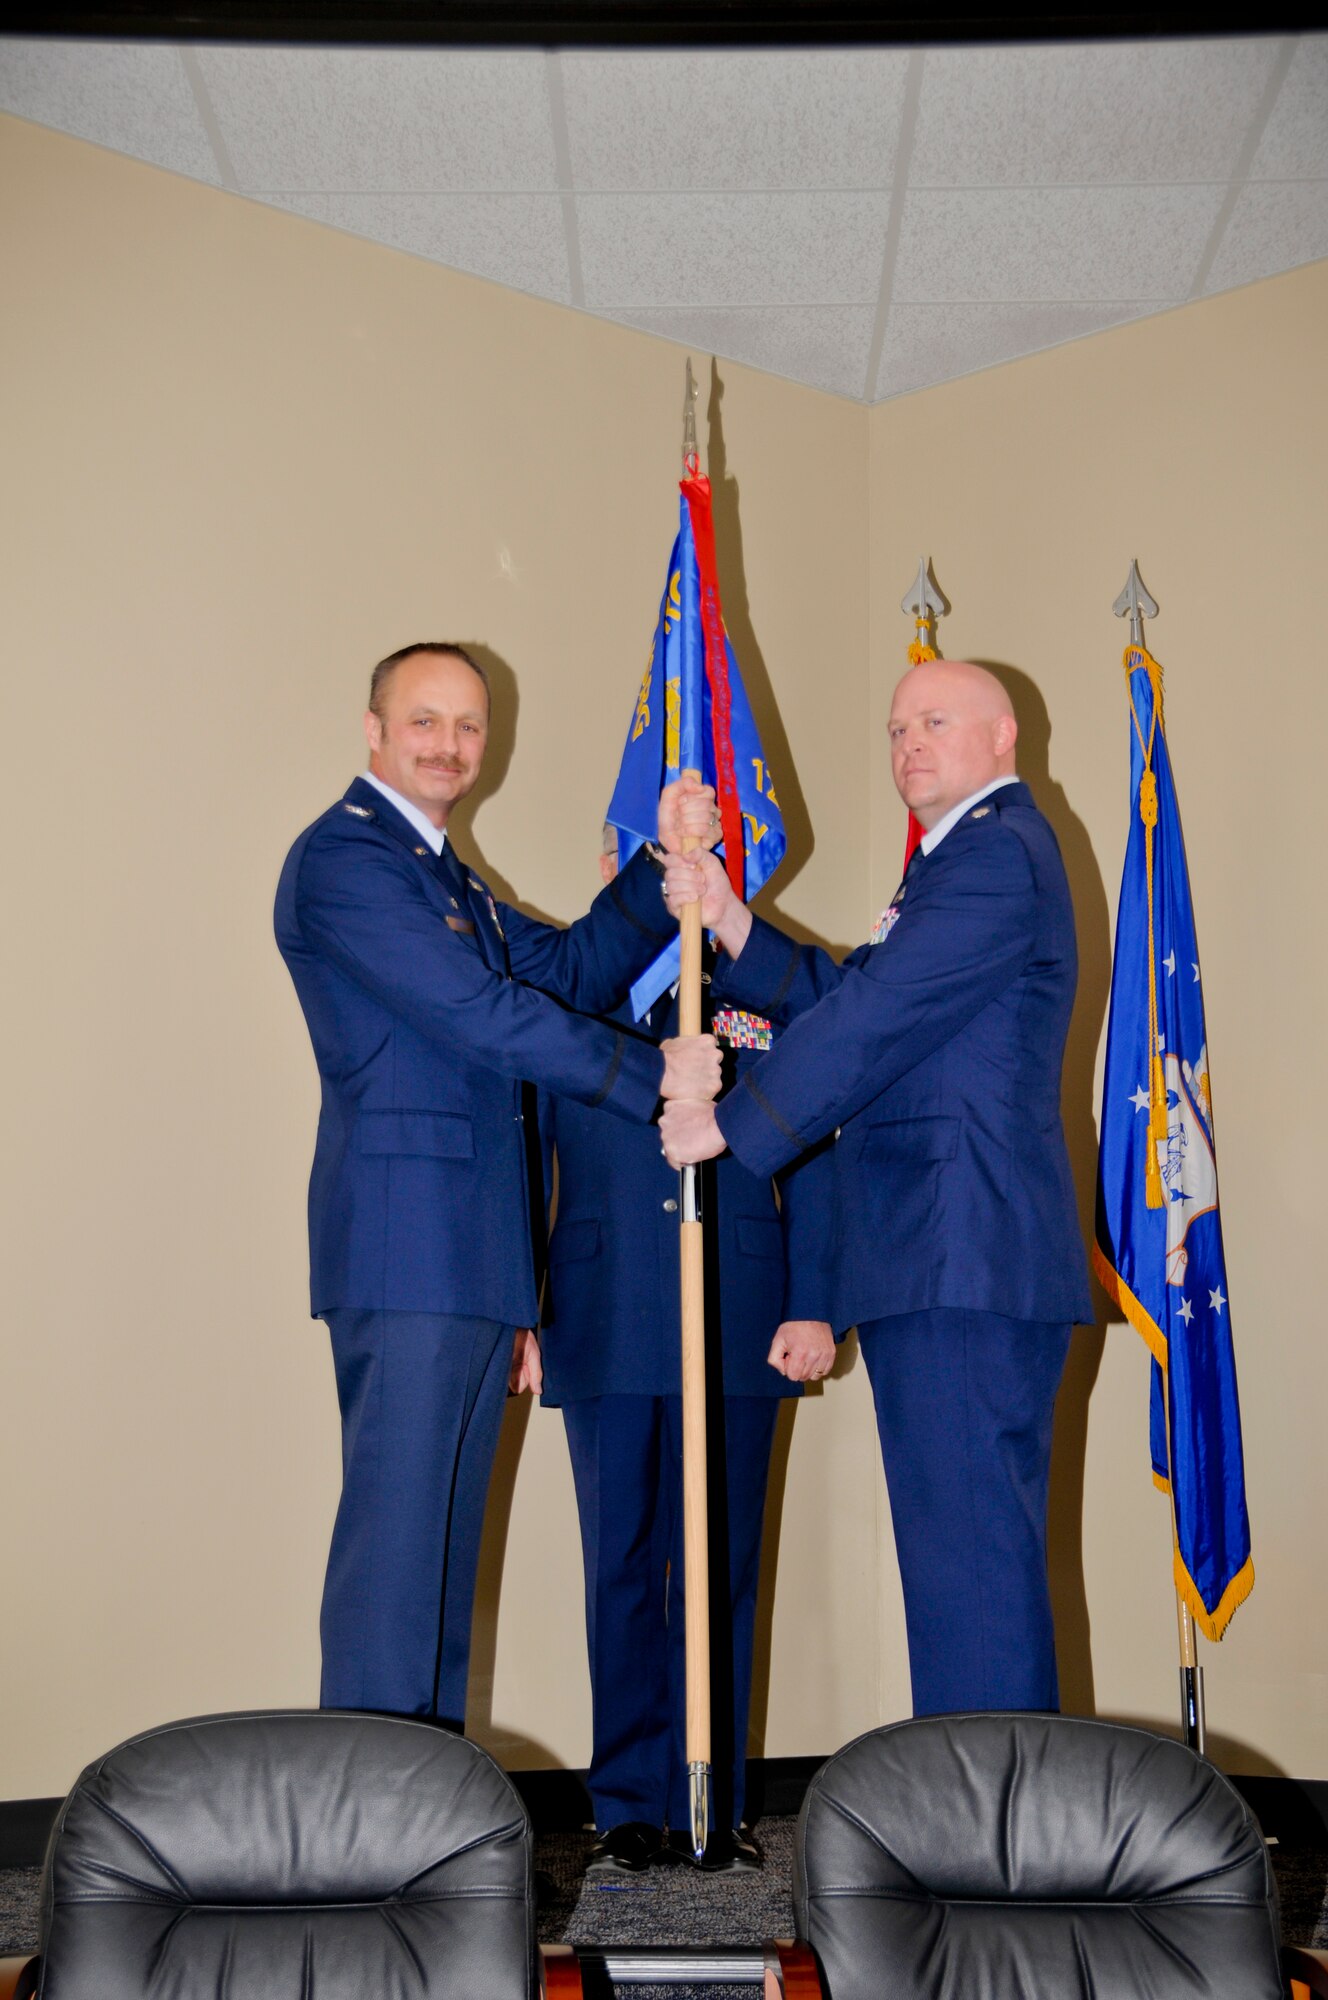 Col. Robert I. Kinney, 188th Intelligence, Surveillance and Reconnaisance Group commander, hands over the 123rd Intelligence Squadron flag to Lt. Col. Sonny L. Stefancic, 123rd IS commander, during a change of command ceremony held March 8 at Ebbing Air National Guard Base, Fort Smith, Ark. (U.S. Air National Guard photo by Staff Sgt. John Suleski)